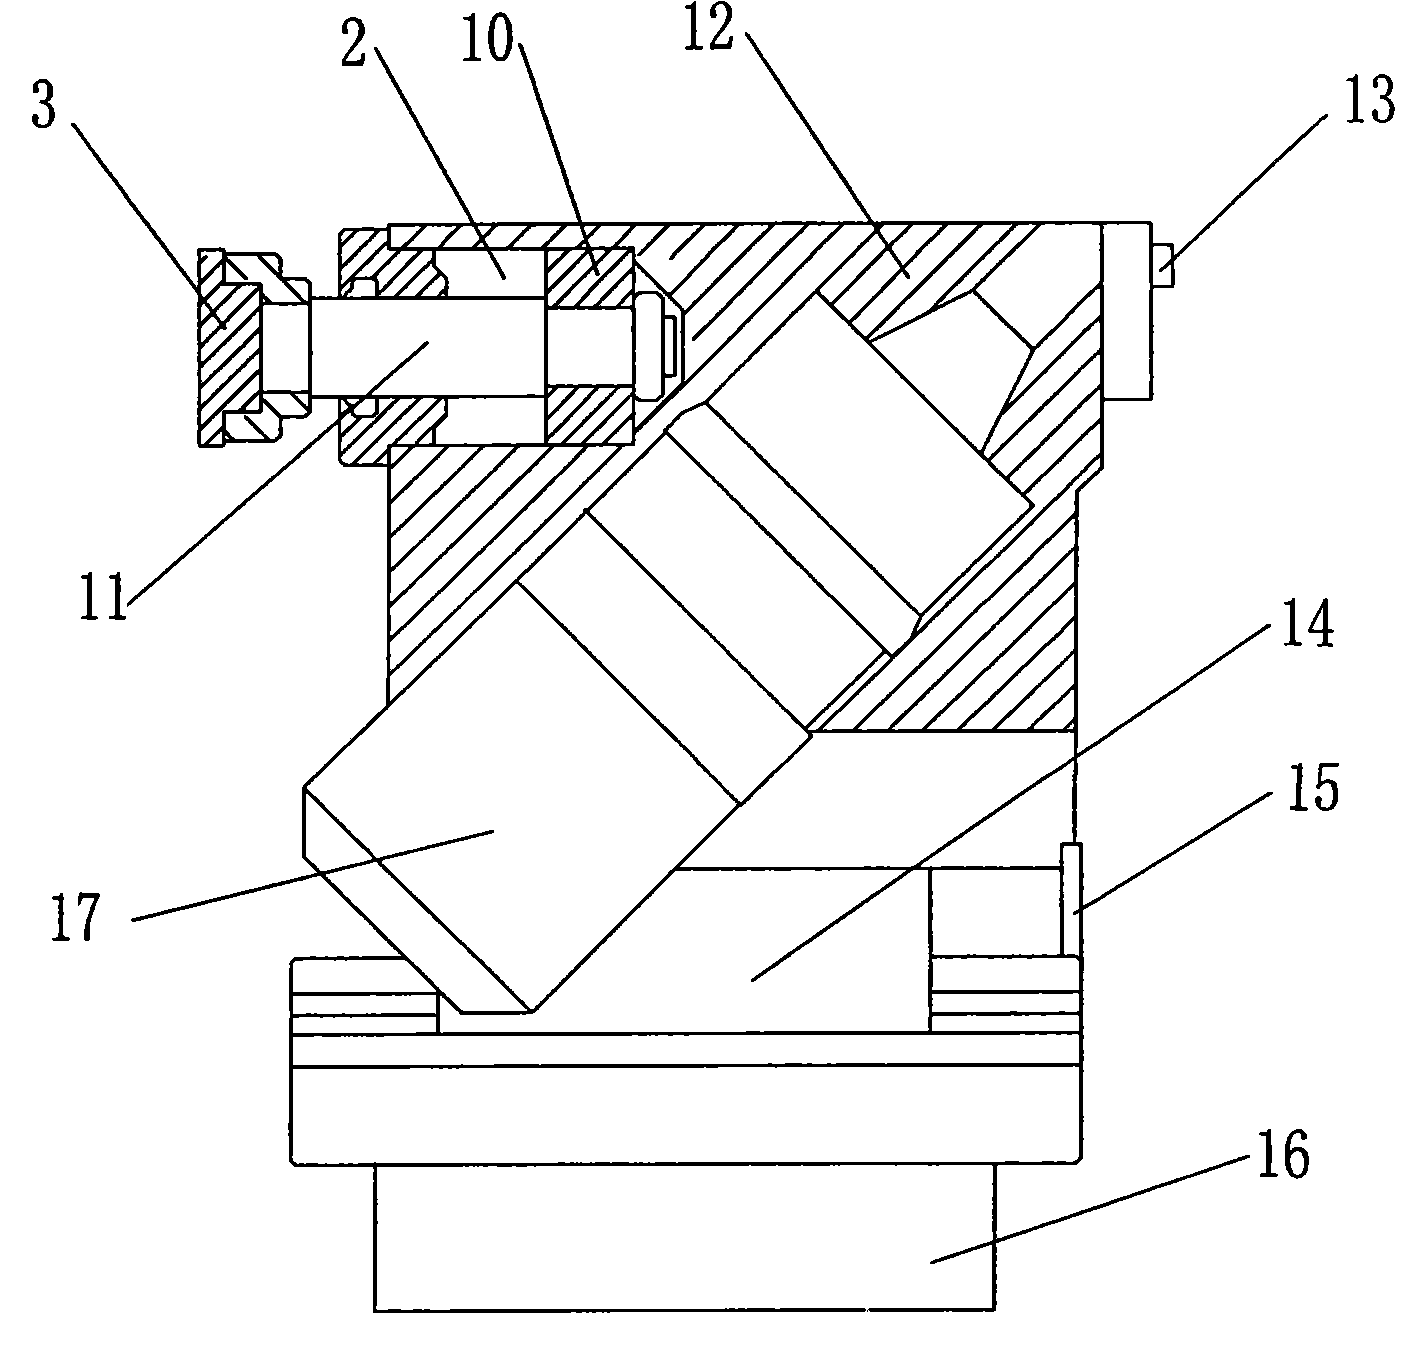 Ultrasonic metallic surface processing device for borer